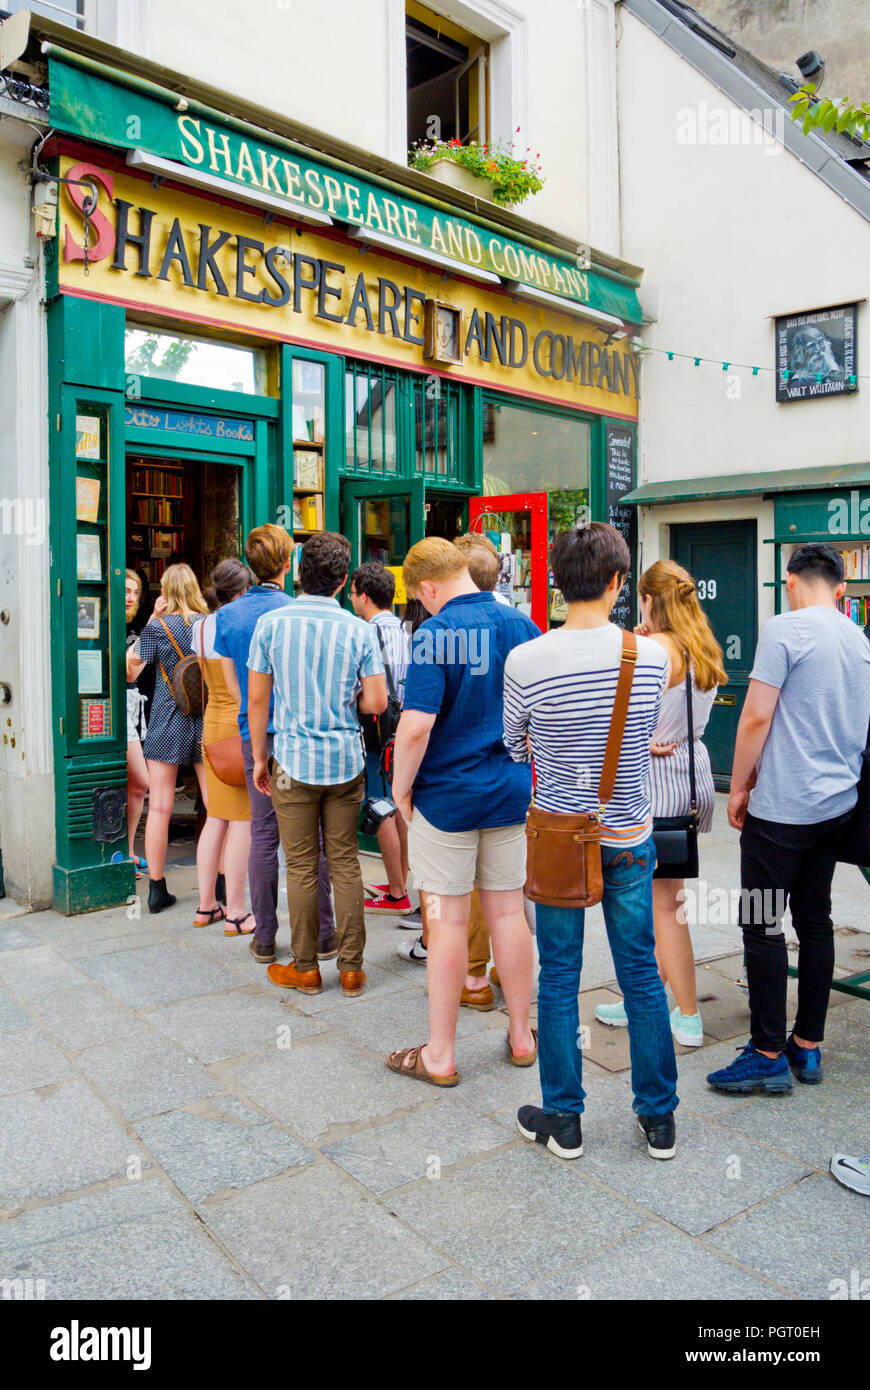 Shakespeare and Co bookshop in Paris Stock Photo - Alamy